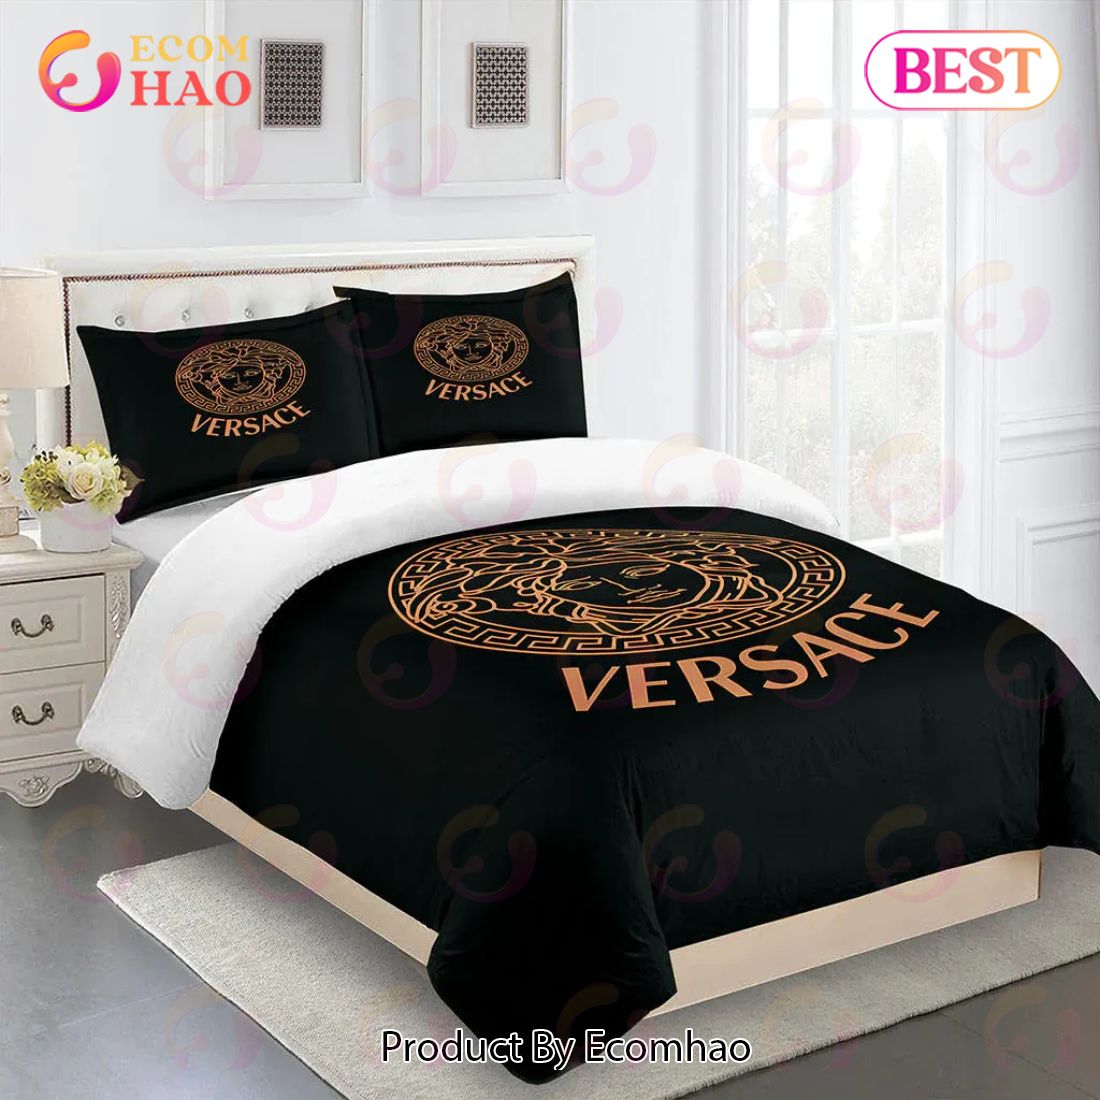 Bronze Versace Logo Luxury Brand High End Premium Bedding Set For Bedroom Luxury Bedspread Duvet Cover Set With Pillowcases Home Decoration